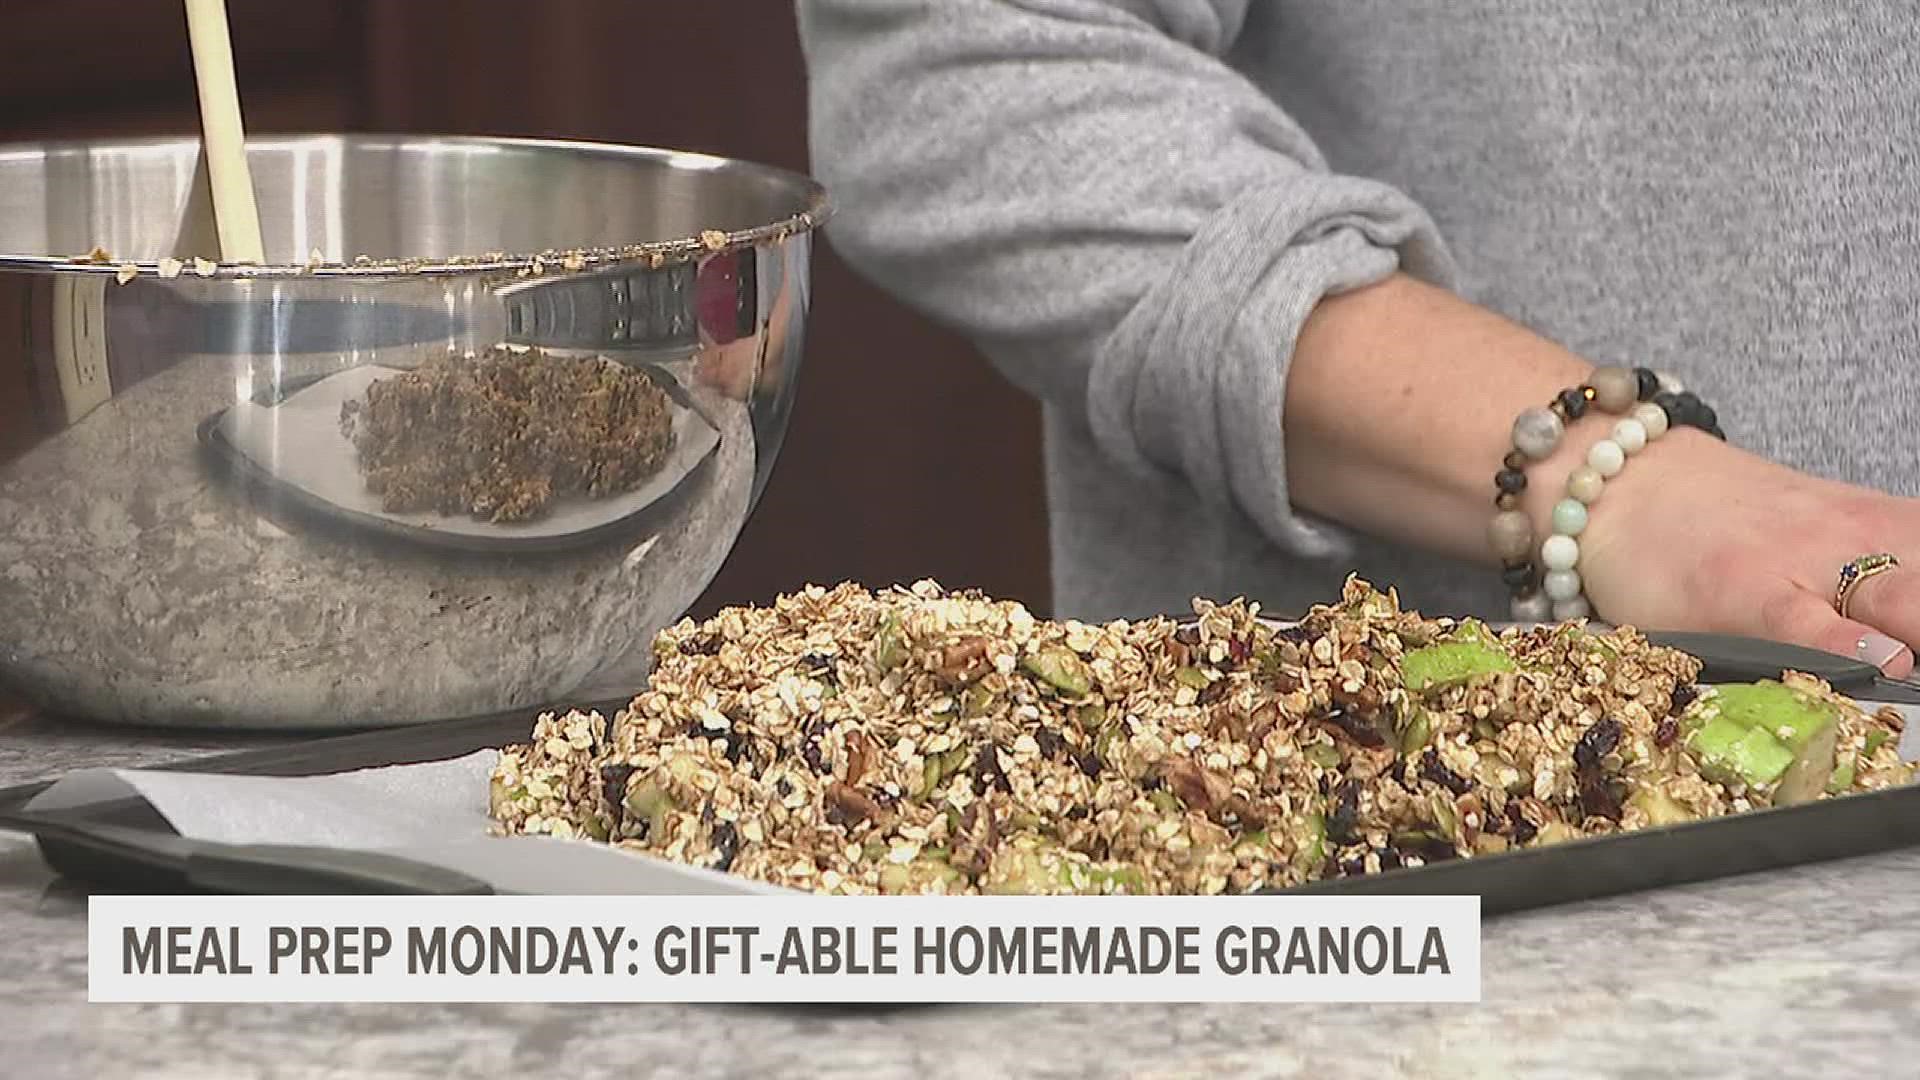 As a thoughtful gift or healthy make-ahead breakfast or snack, fill mason jars with this spicy, crunchy, and slightly addictive homemade granola.